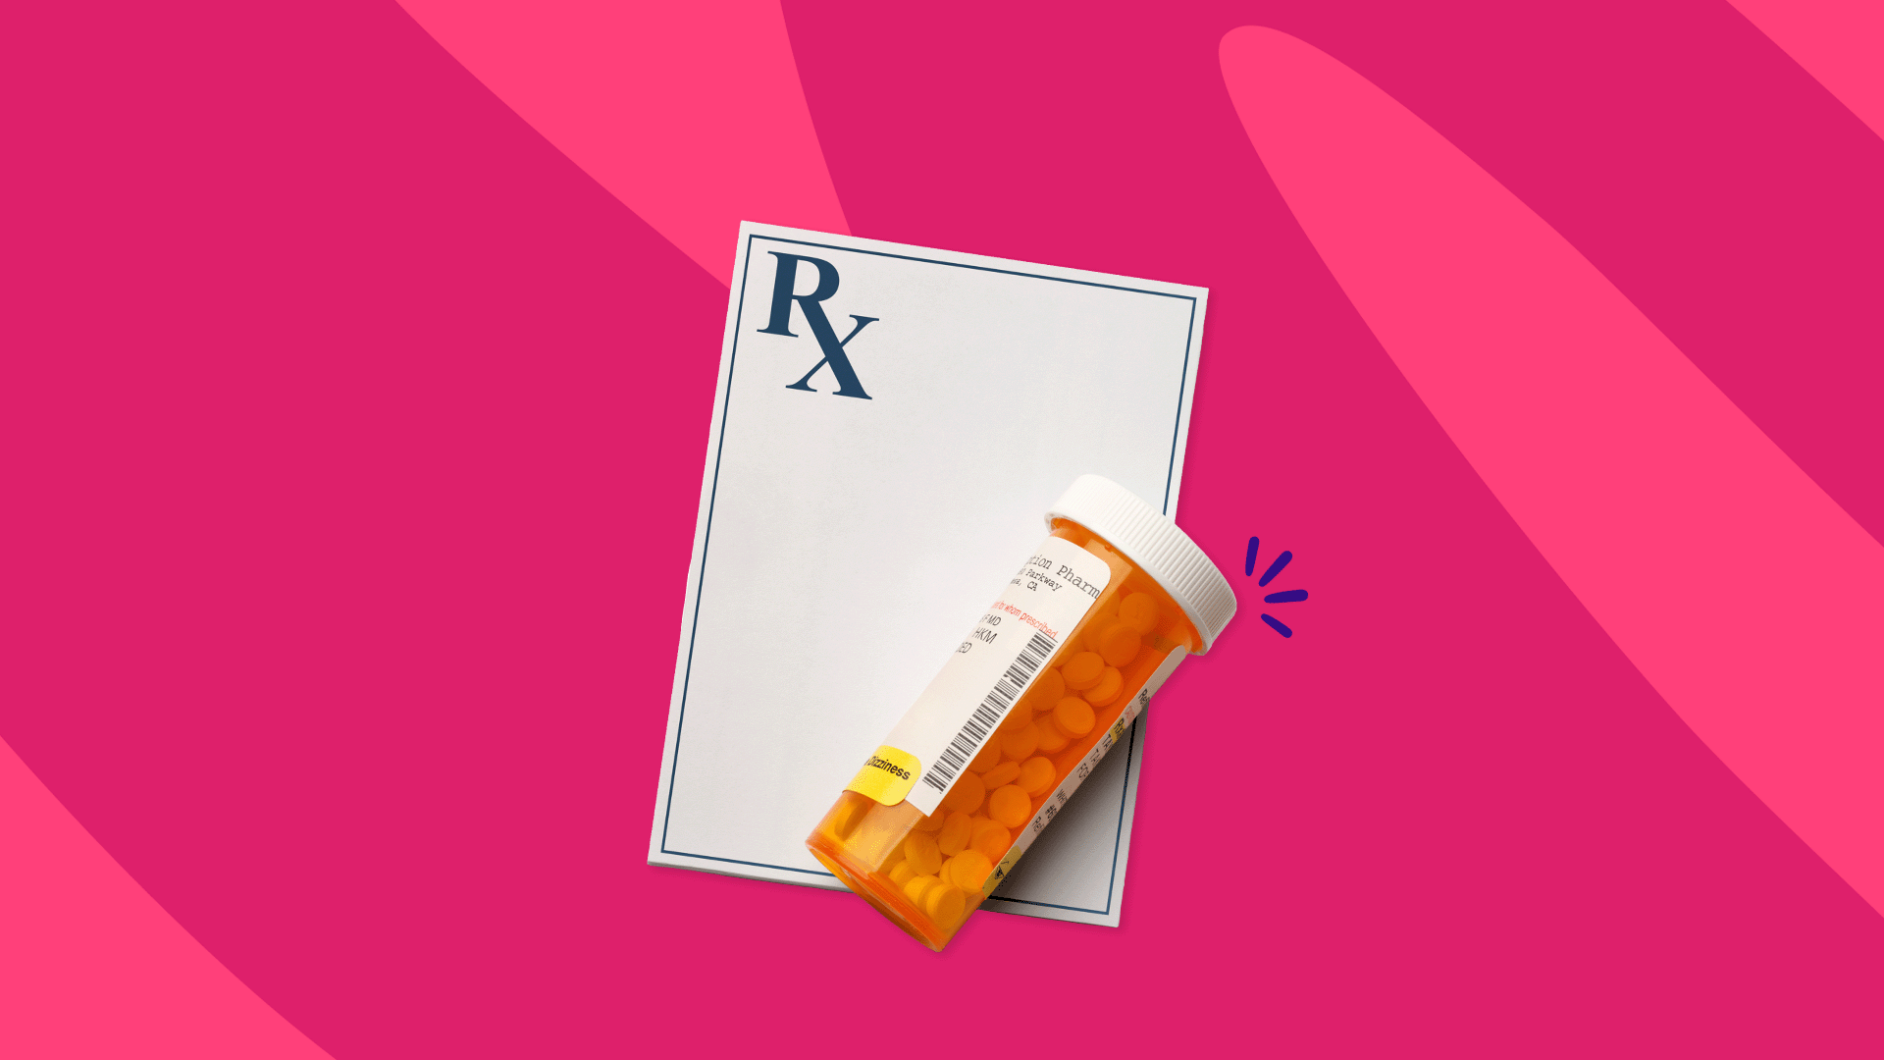 Rx prescription pad and Rx pill bottle: Acetaminophen interactions